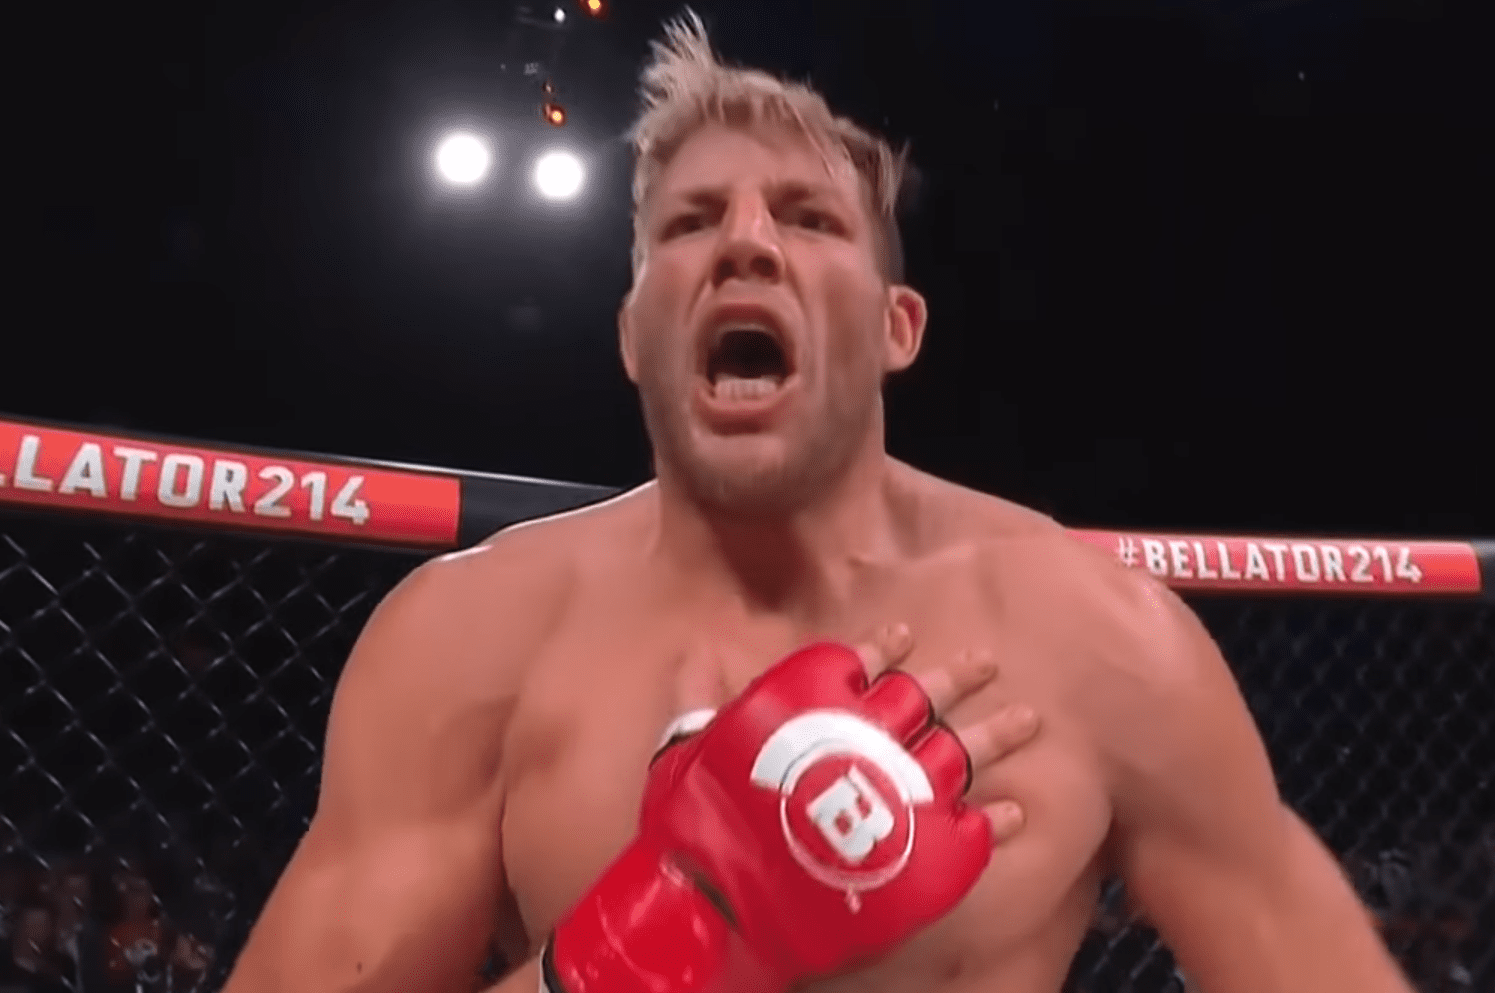 Why Jack Swagger Was Allowed To Use “We The People” In Bellator